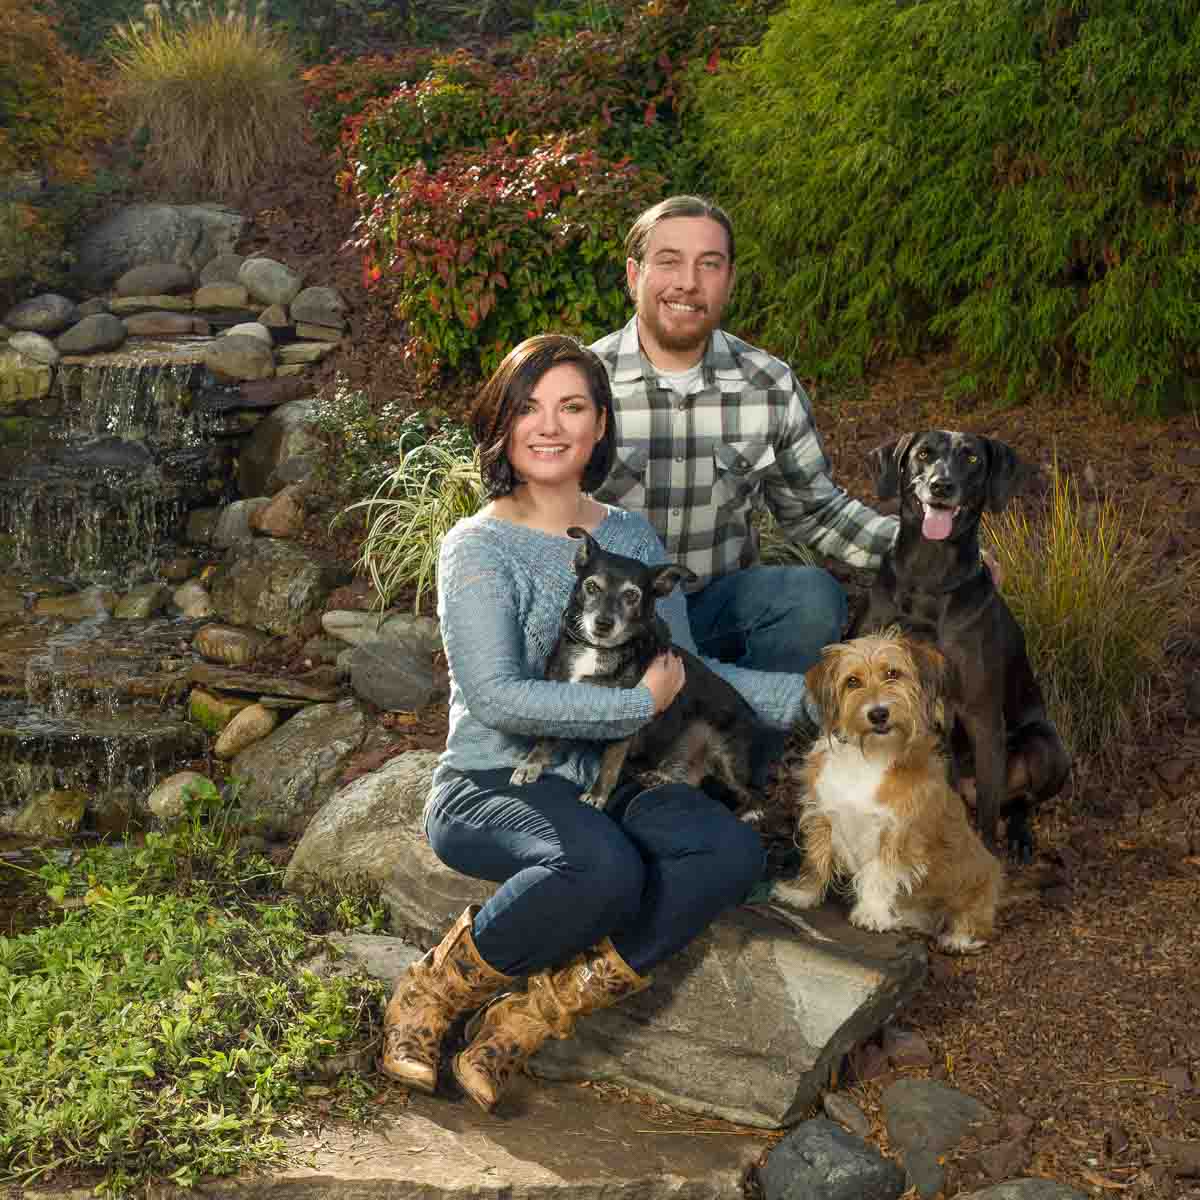 A man and woman sitting on rocks with two dogs.